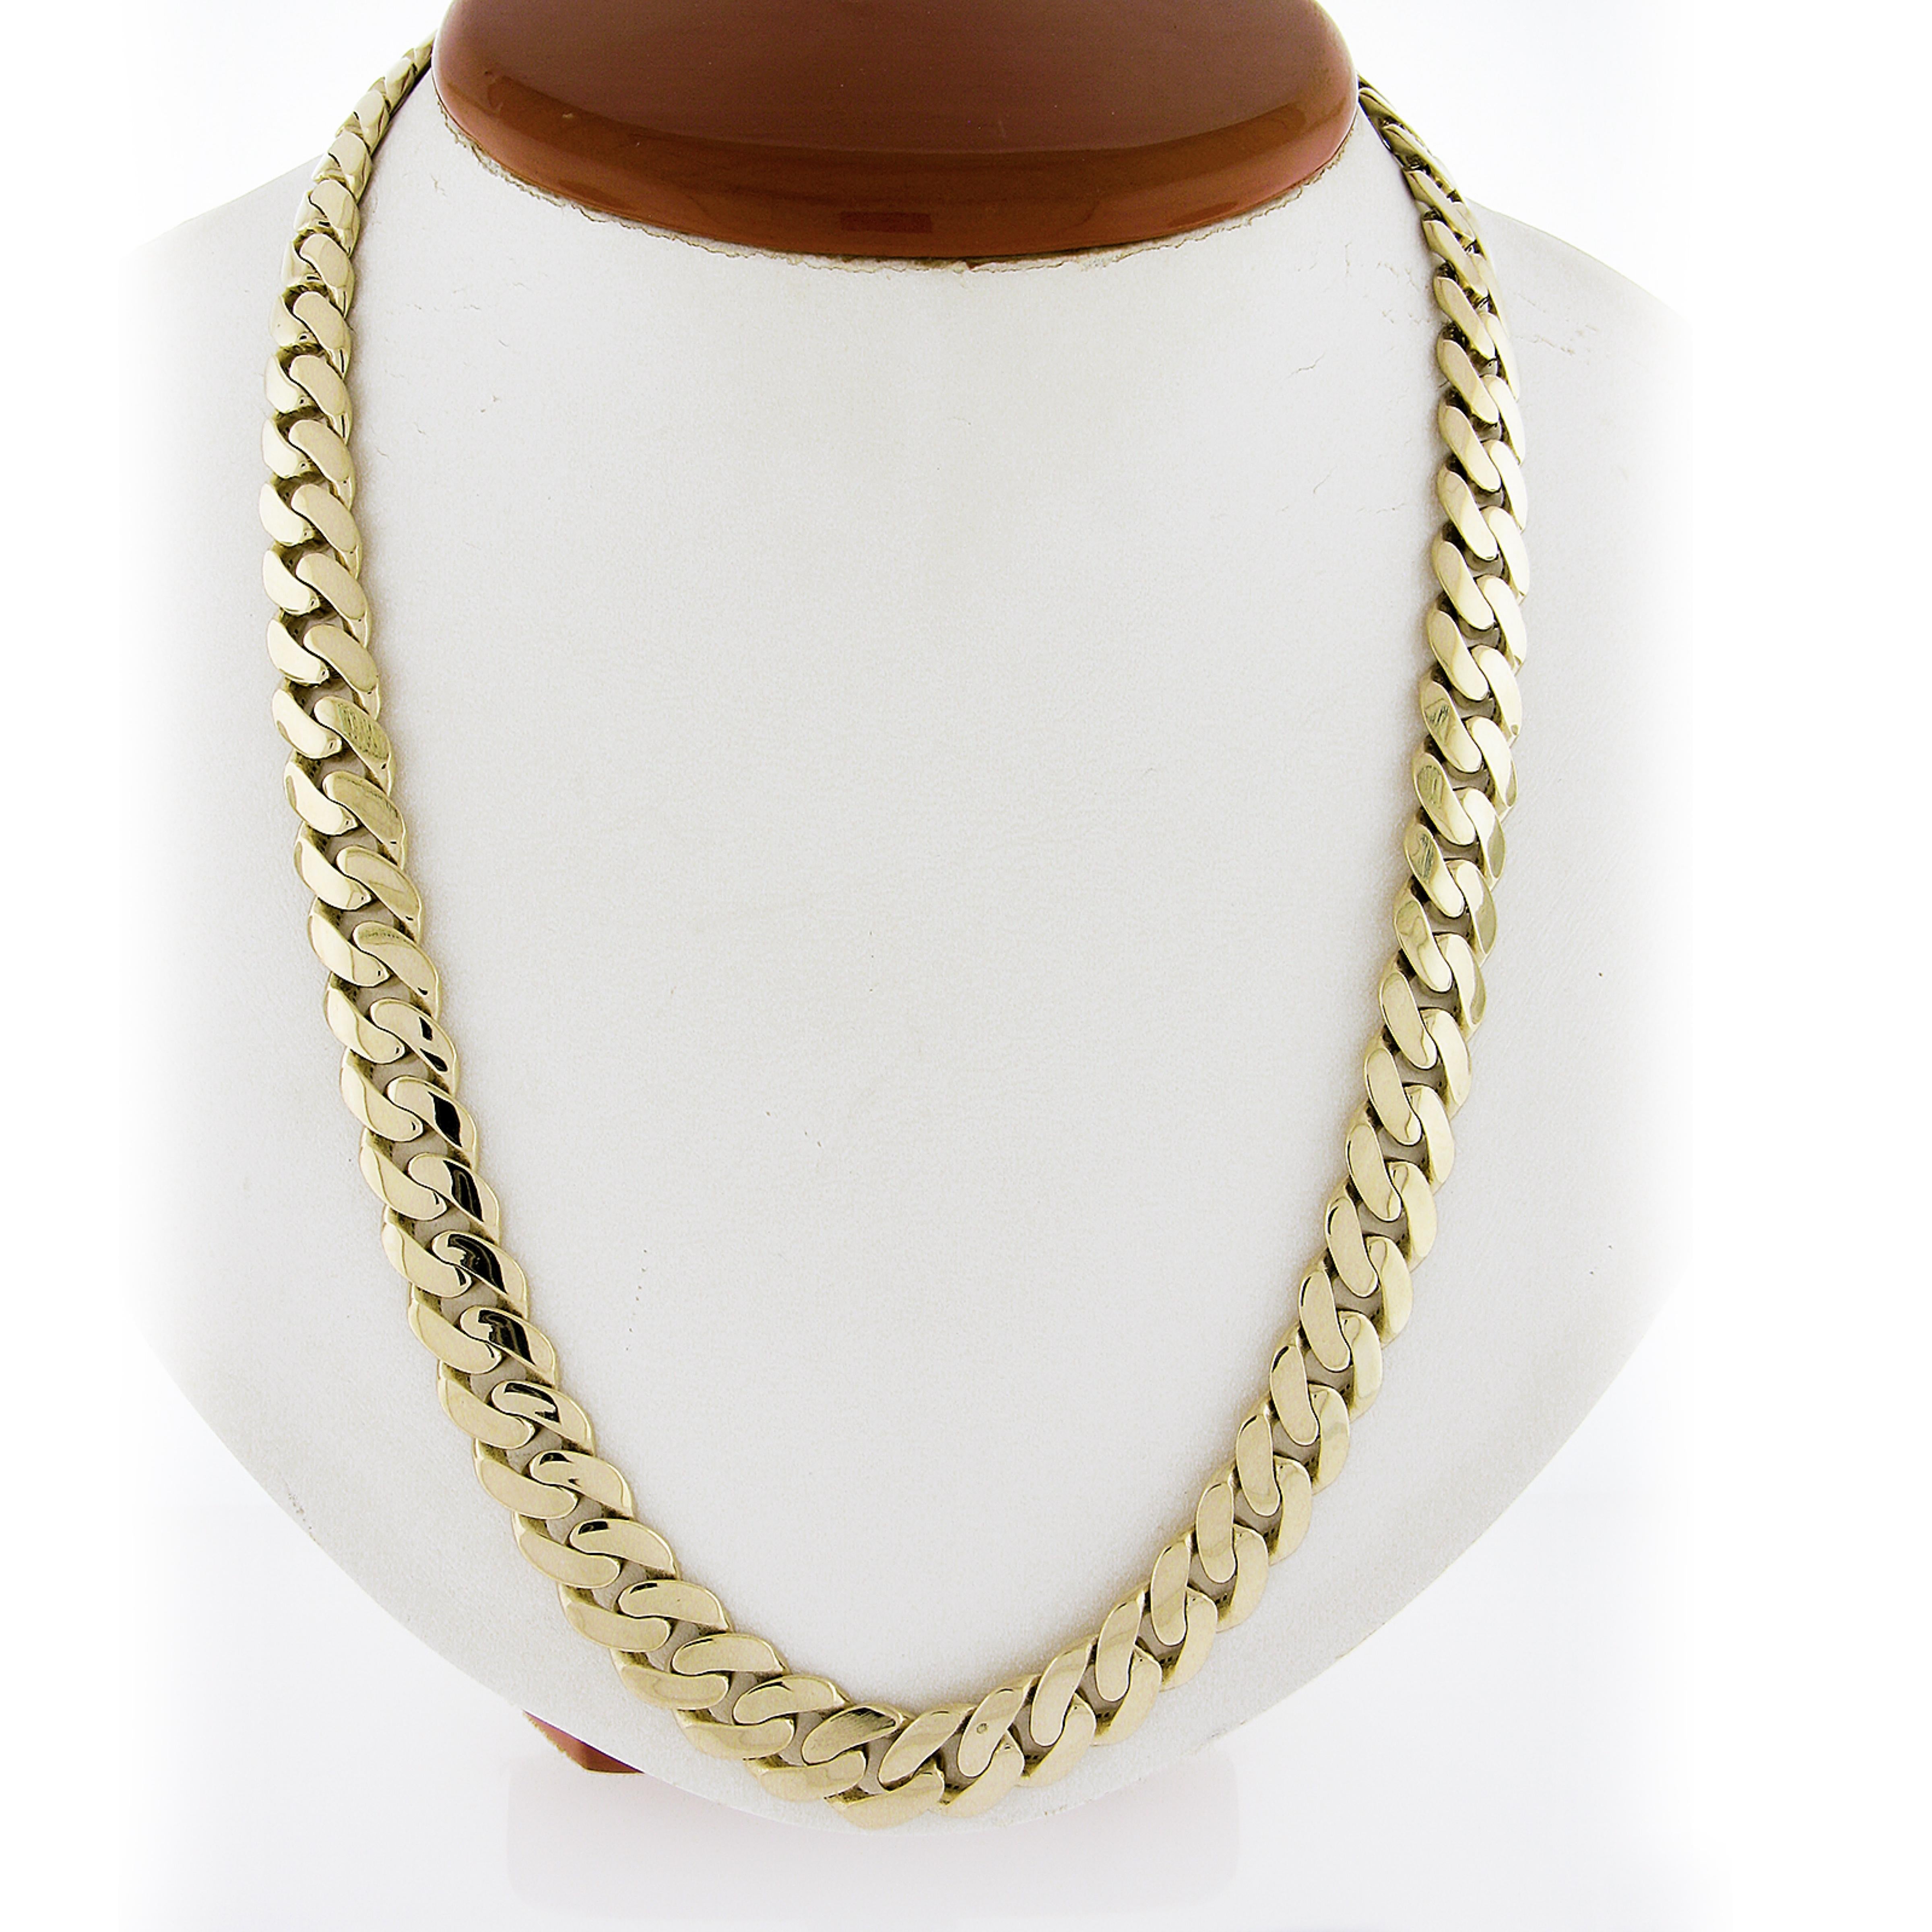 Material: Solid 14k Yellow Gold (Solid Gold - Semi Hollow Design)
Weight: 54.49 Grams
Chain Type: Cuban/Curb Link Chain
Chain Length:	23 Inches
Chain Width: 10.1mm
Chain Thickness: 2.9mm
Clasp: Push Clasp w/ Dual Safety Latch
End Cap Measurements: